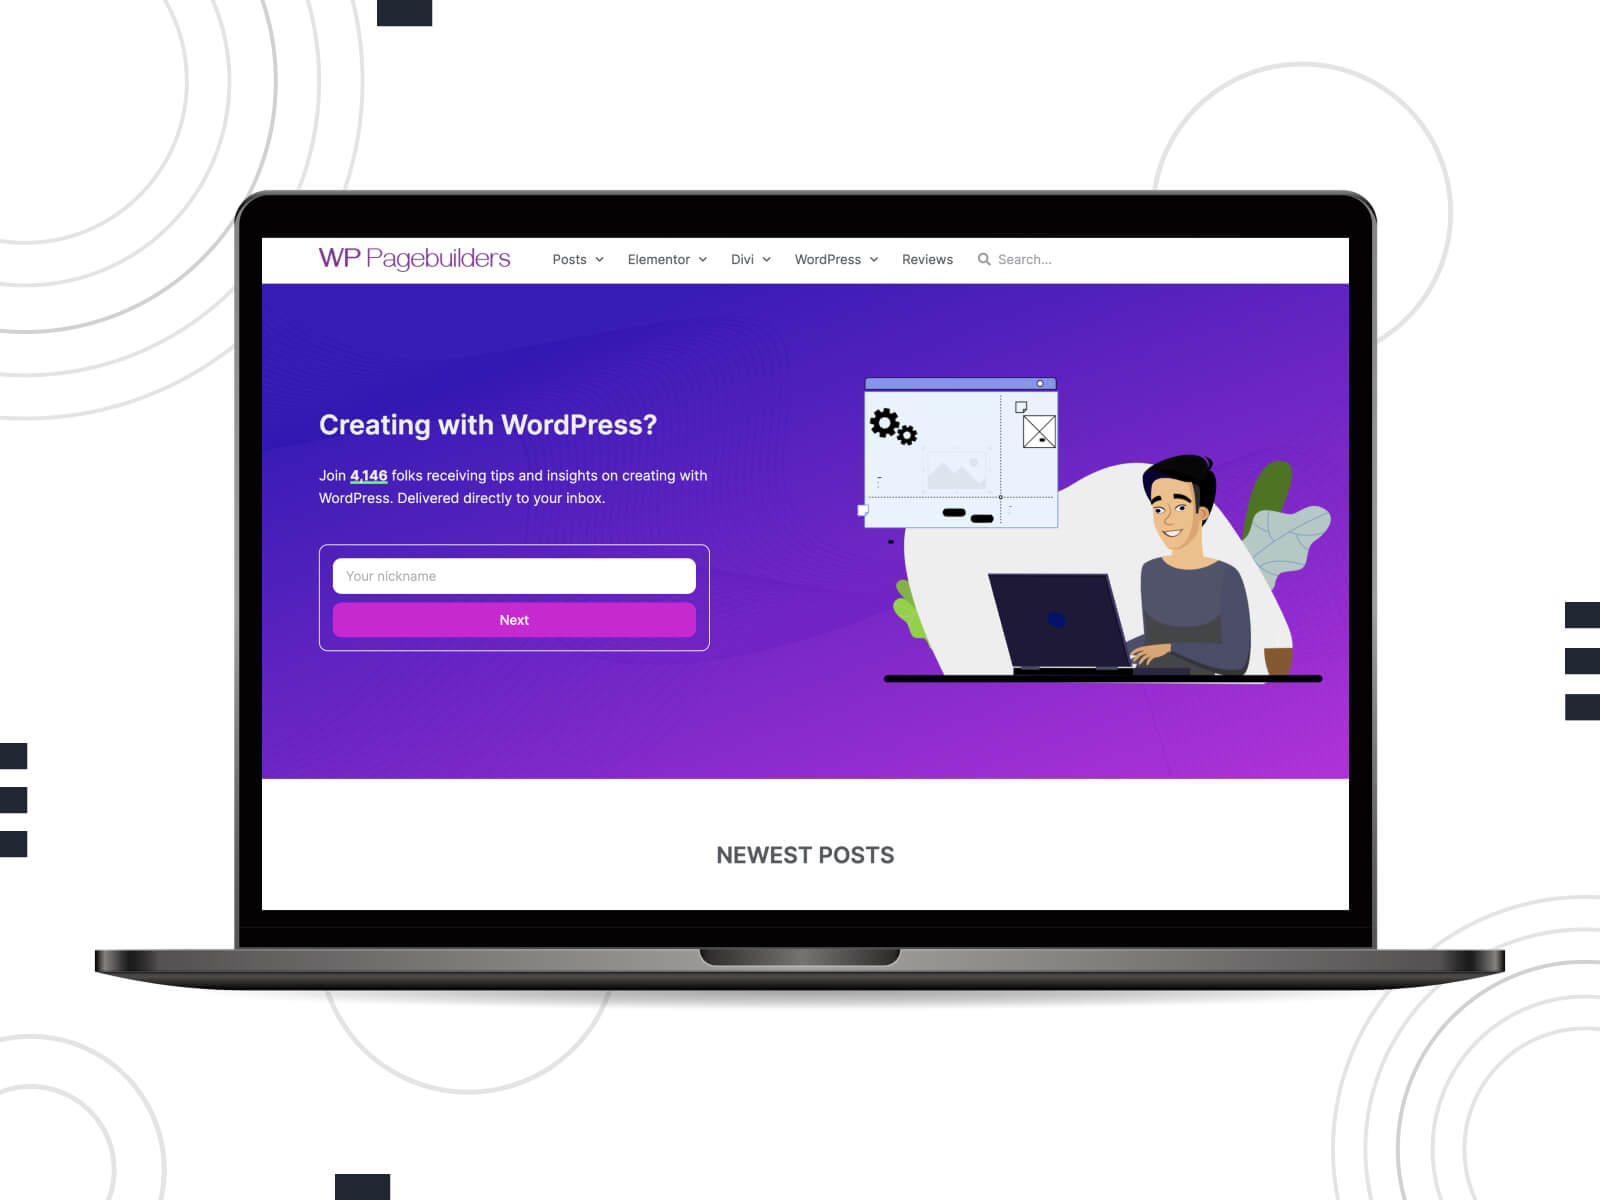 Image of WP Pagebuilders - recommended WordPress website for coding enthusiasts in slate blue, and dark orchid color palette.